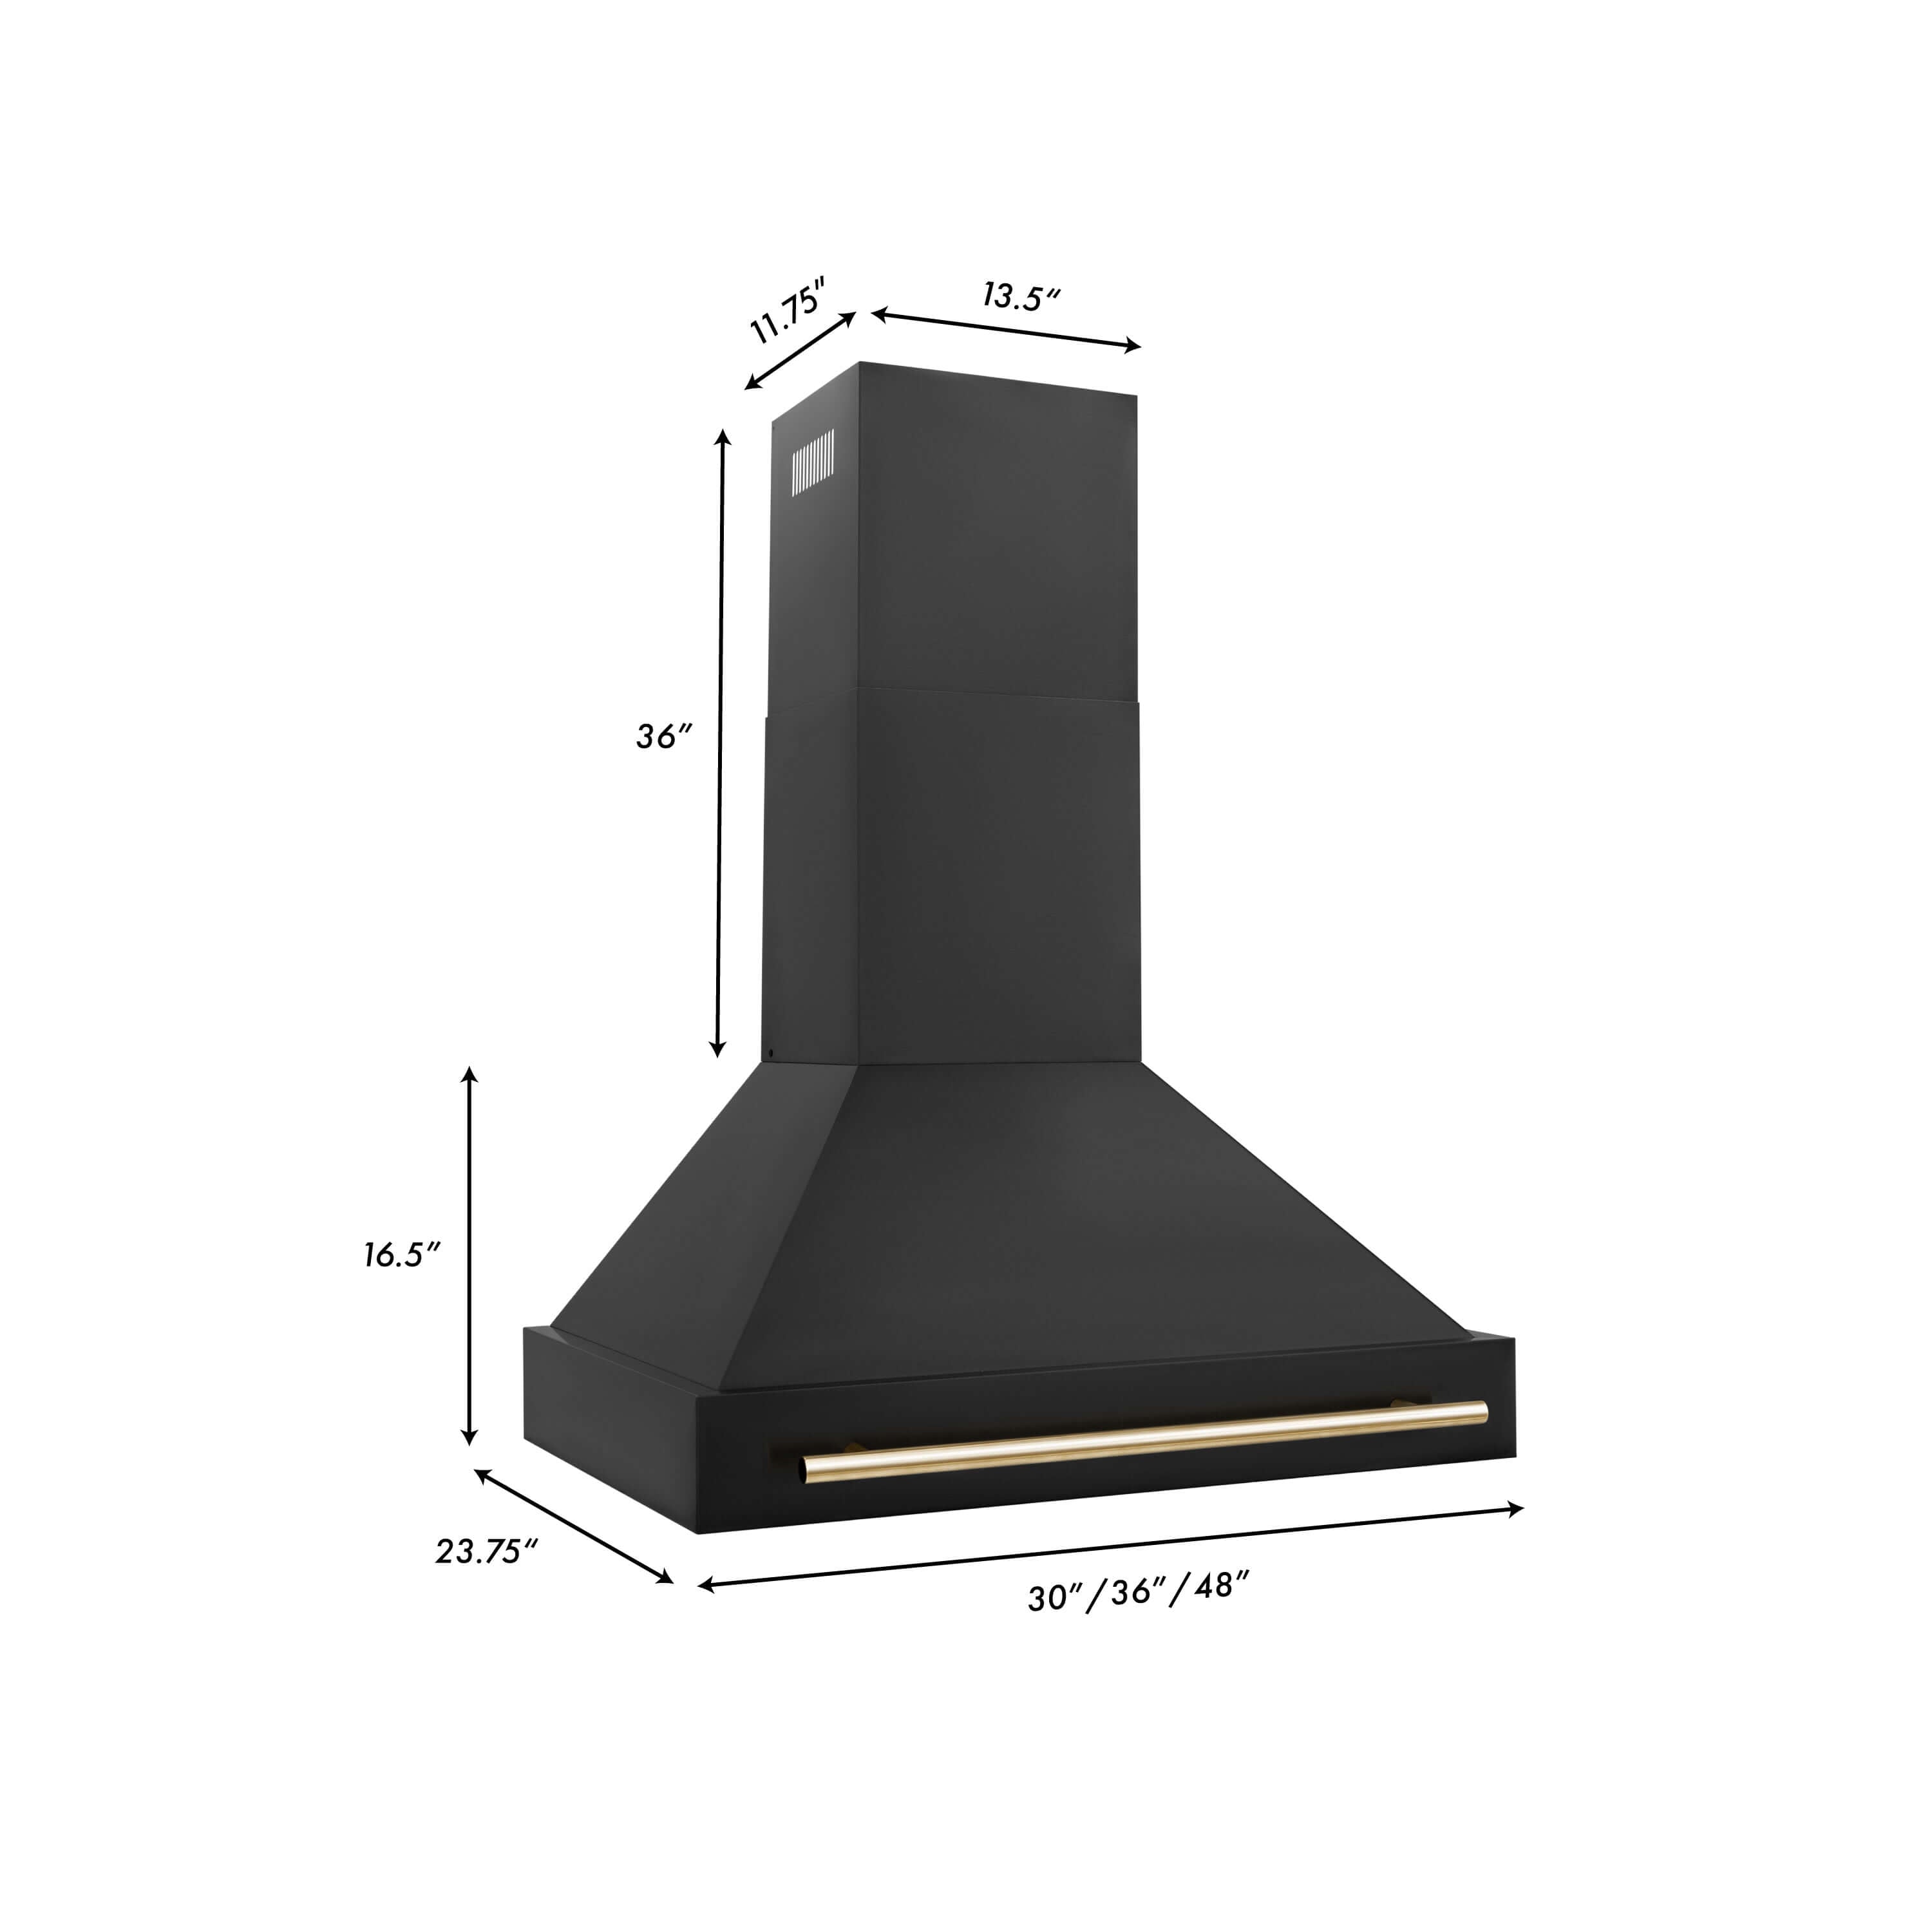 ZLINE Autograph Edition 36 in. Kitchen Package with Black Stainless Steel Dual Fuel Range and Range Hood with Polished Gold Accents (2AKP-RABRH36-G) dimensional diagram with measurements.